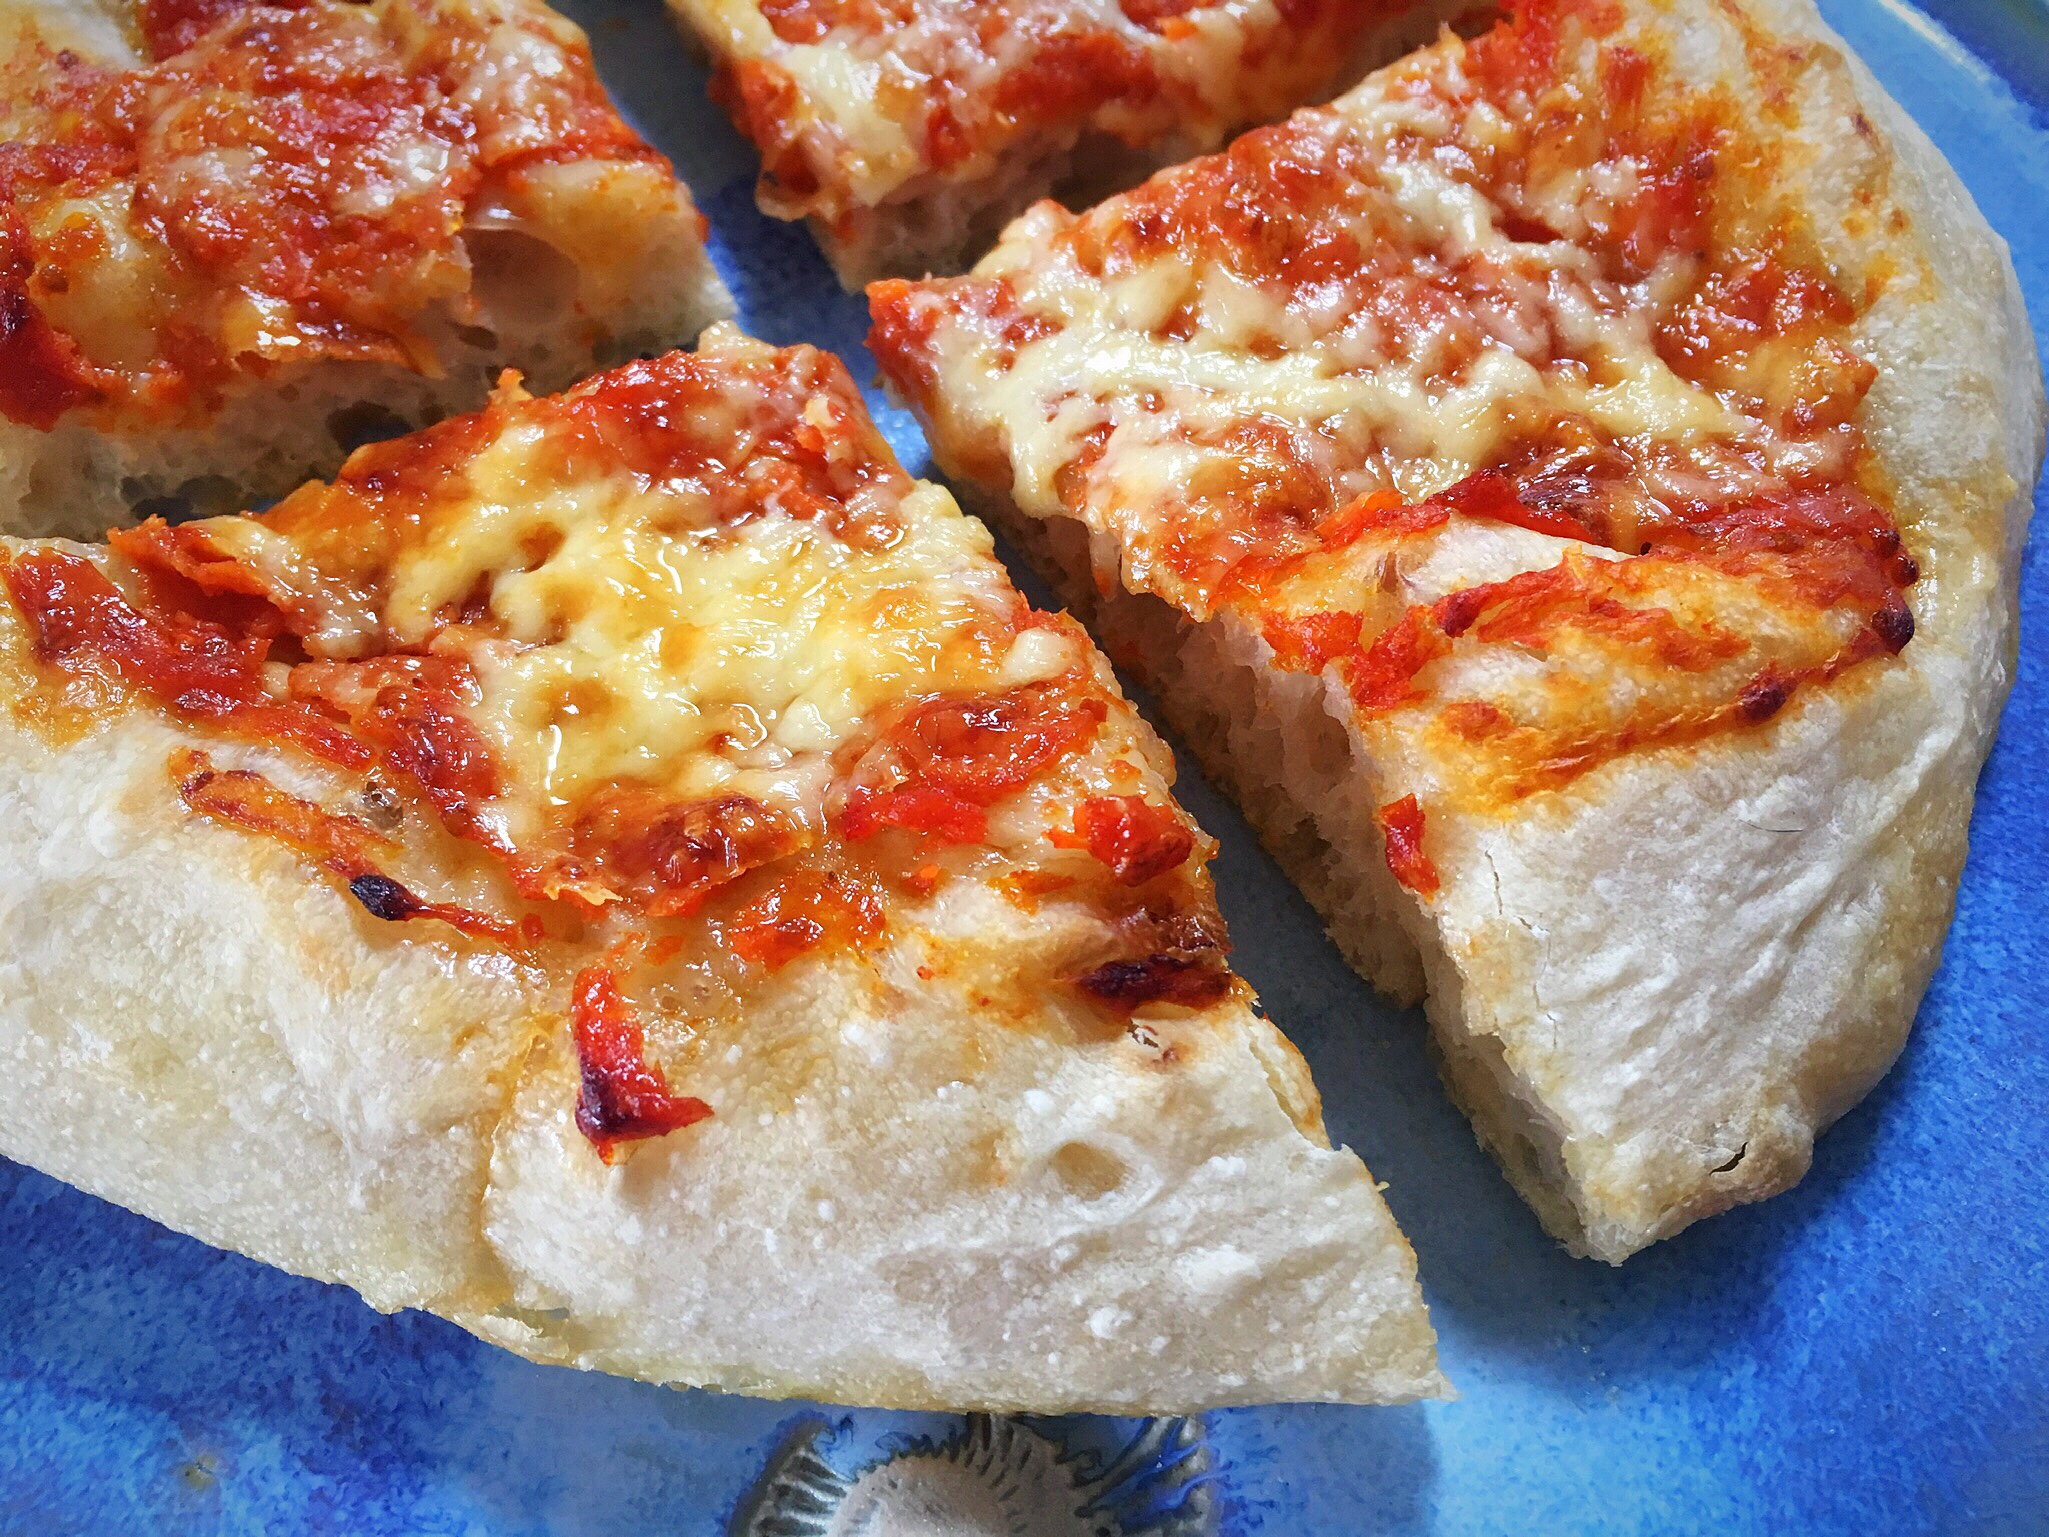 A close up of some pizza slices on a plate